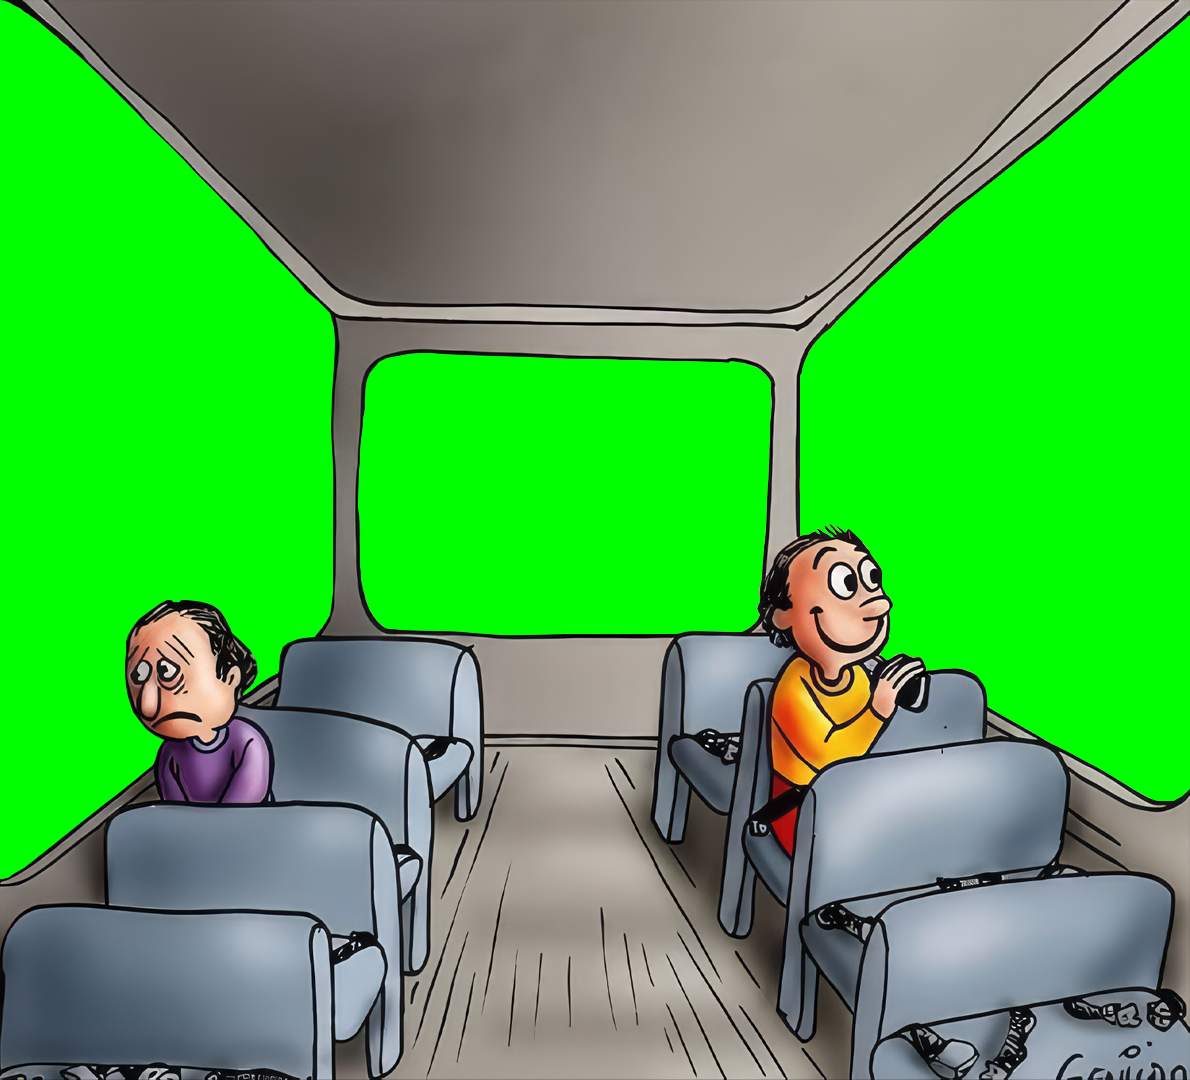 2 Guys Looking Outside Of Bus Window meme - Happy and Sad (Green Screen)